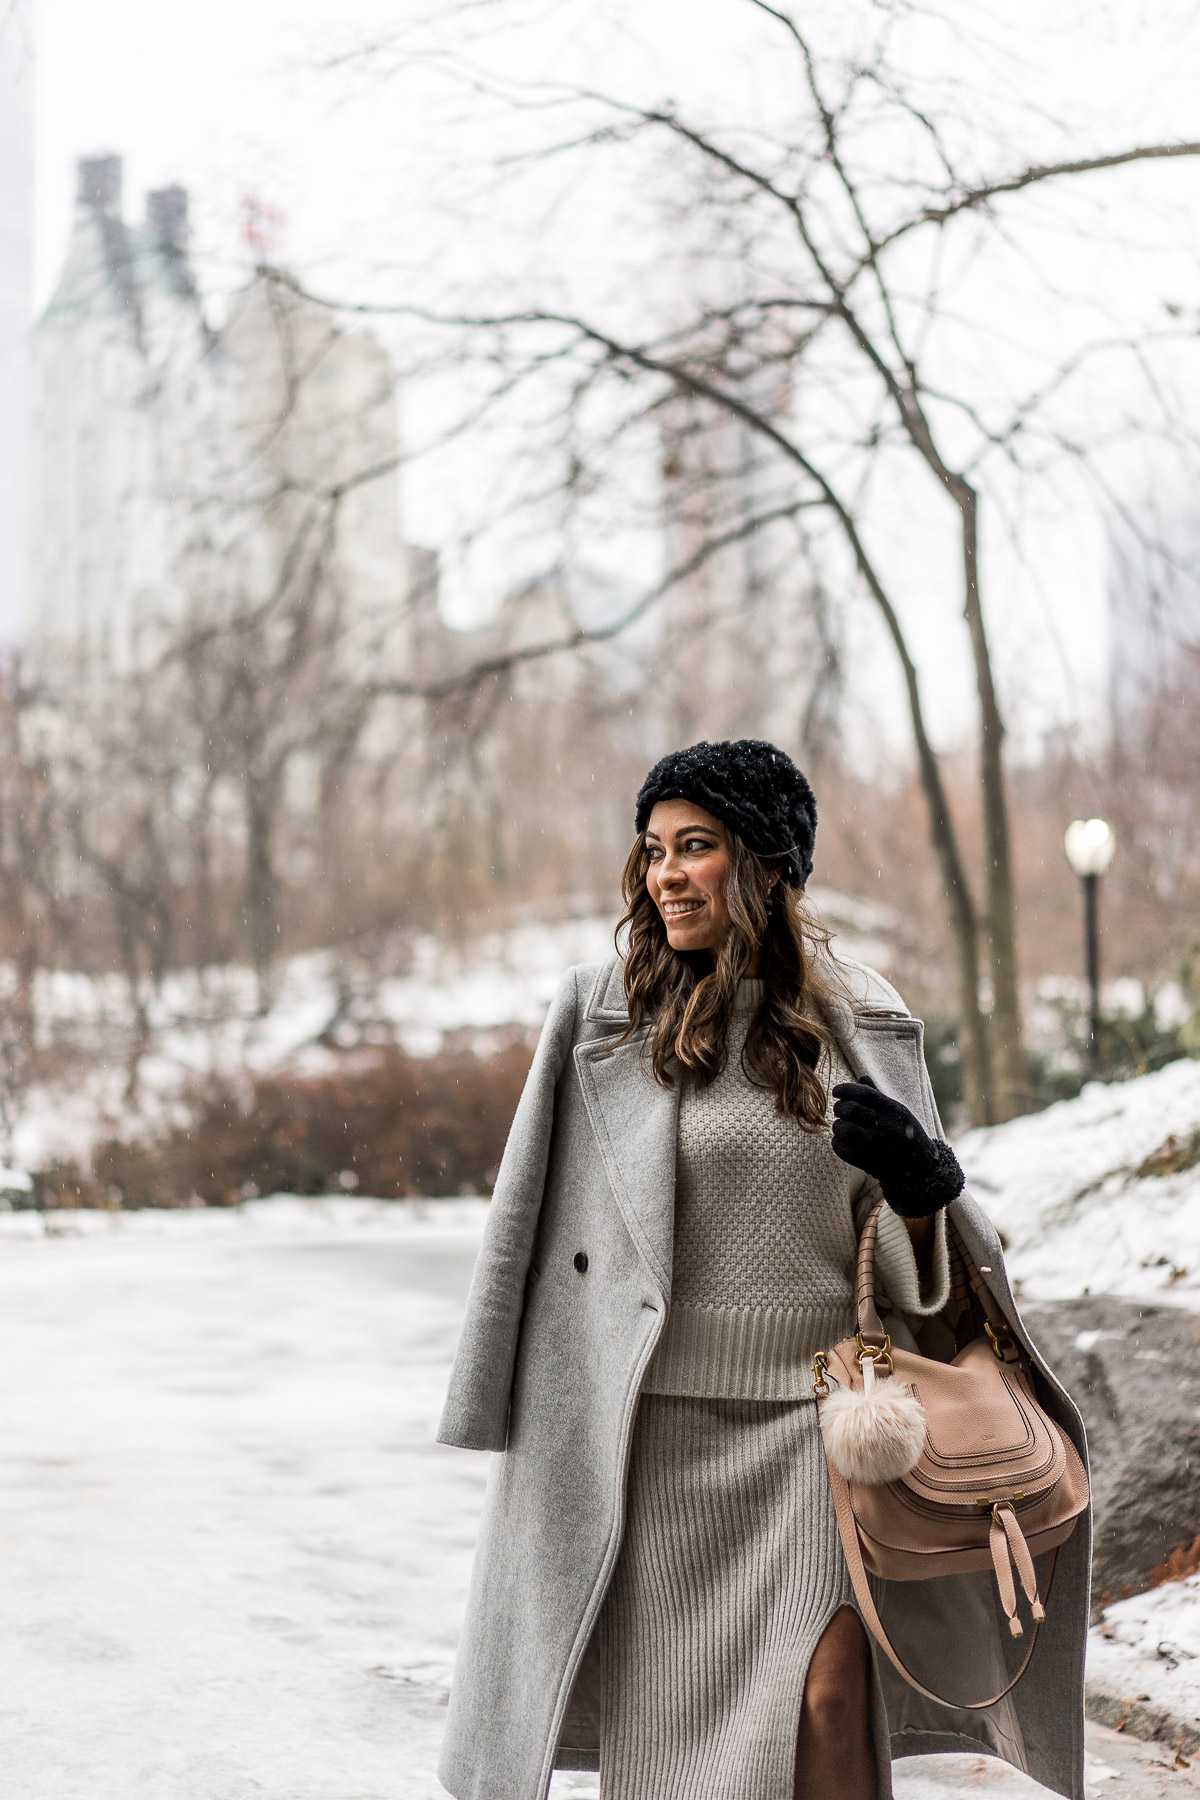 South Florida fashion blogger Amanda visits Central Park during NYFW wearing her grey midi skirt and grey Club Monaco coat with military inspired booties